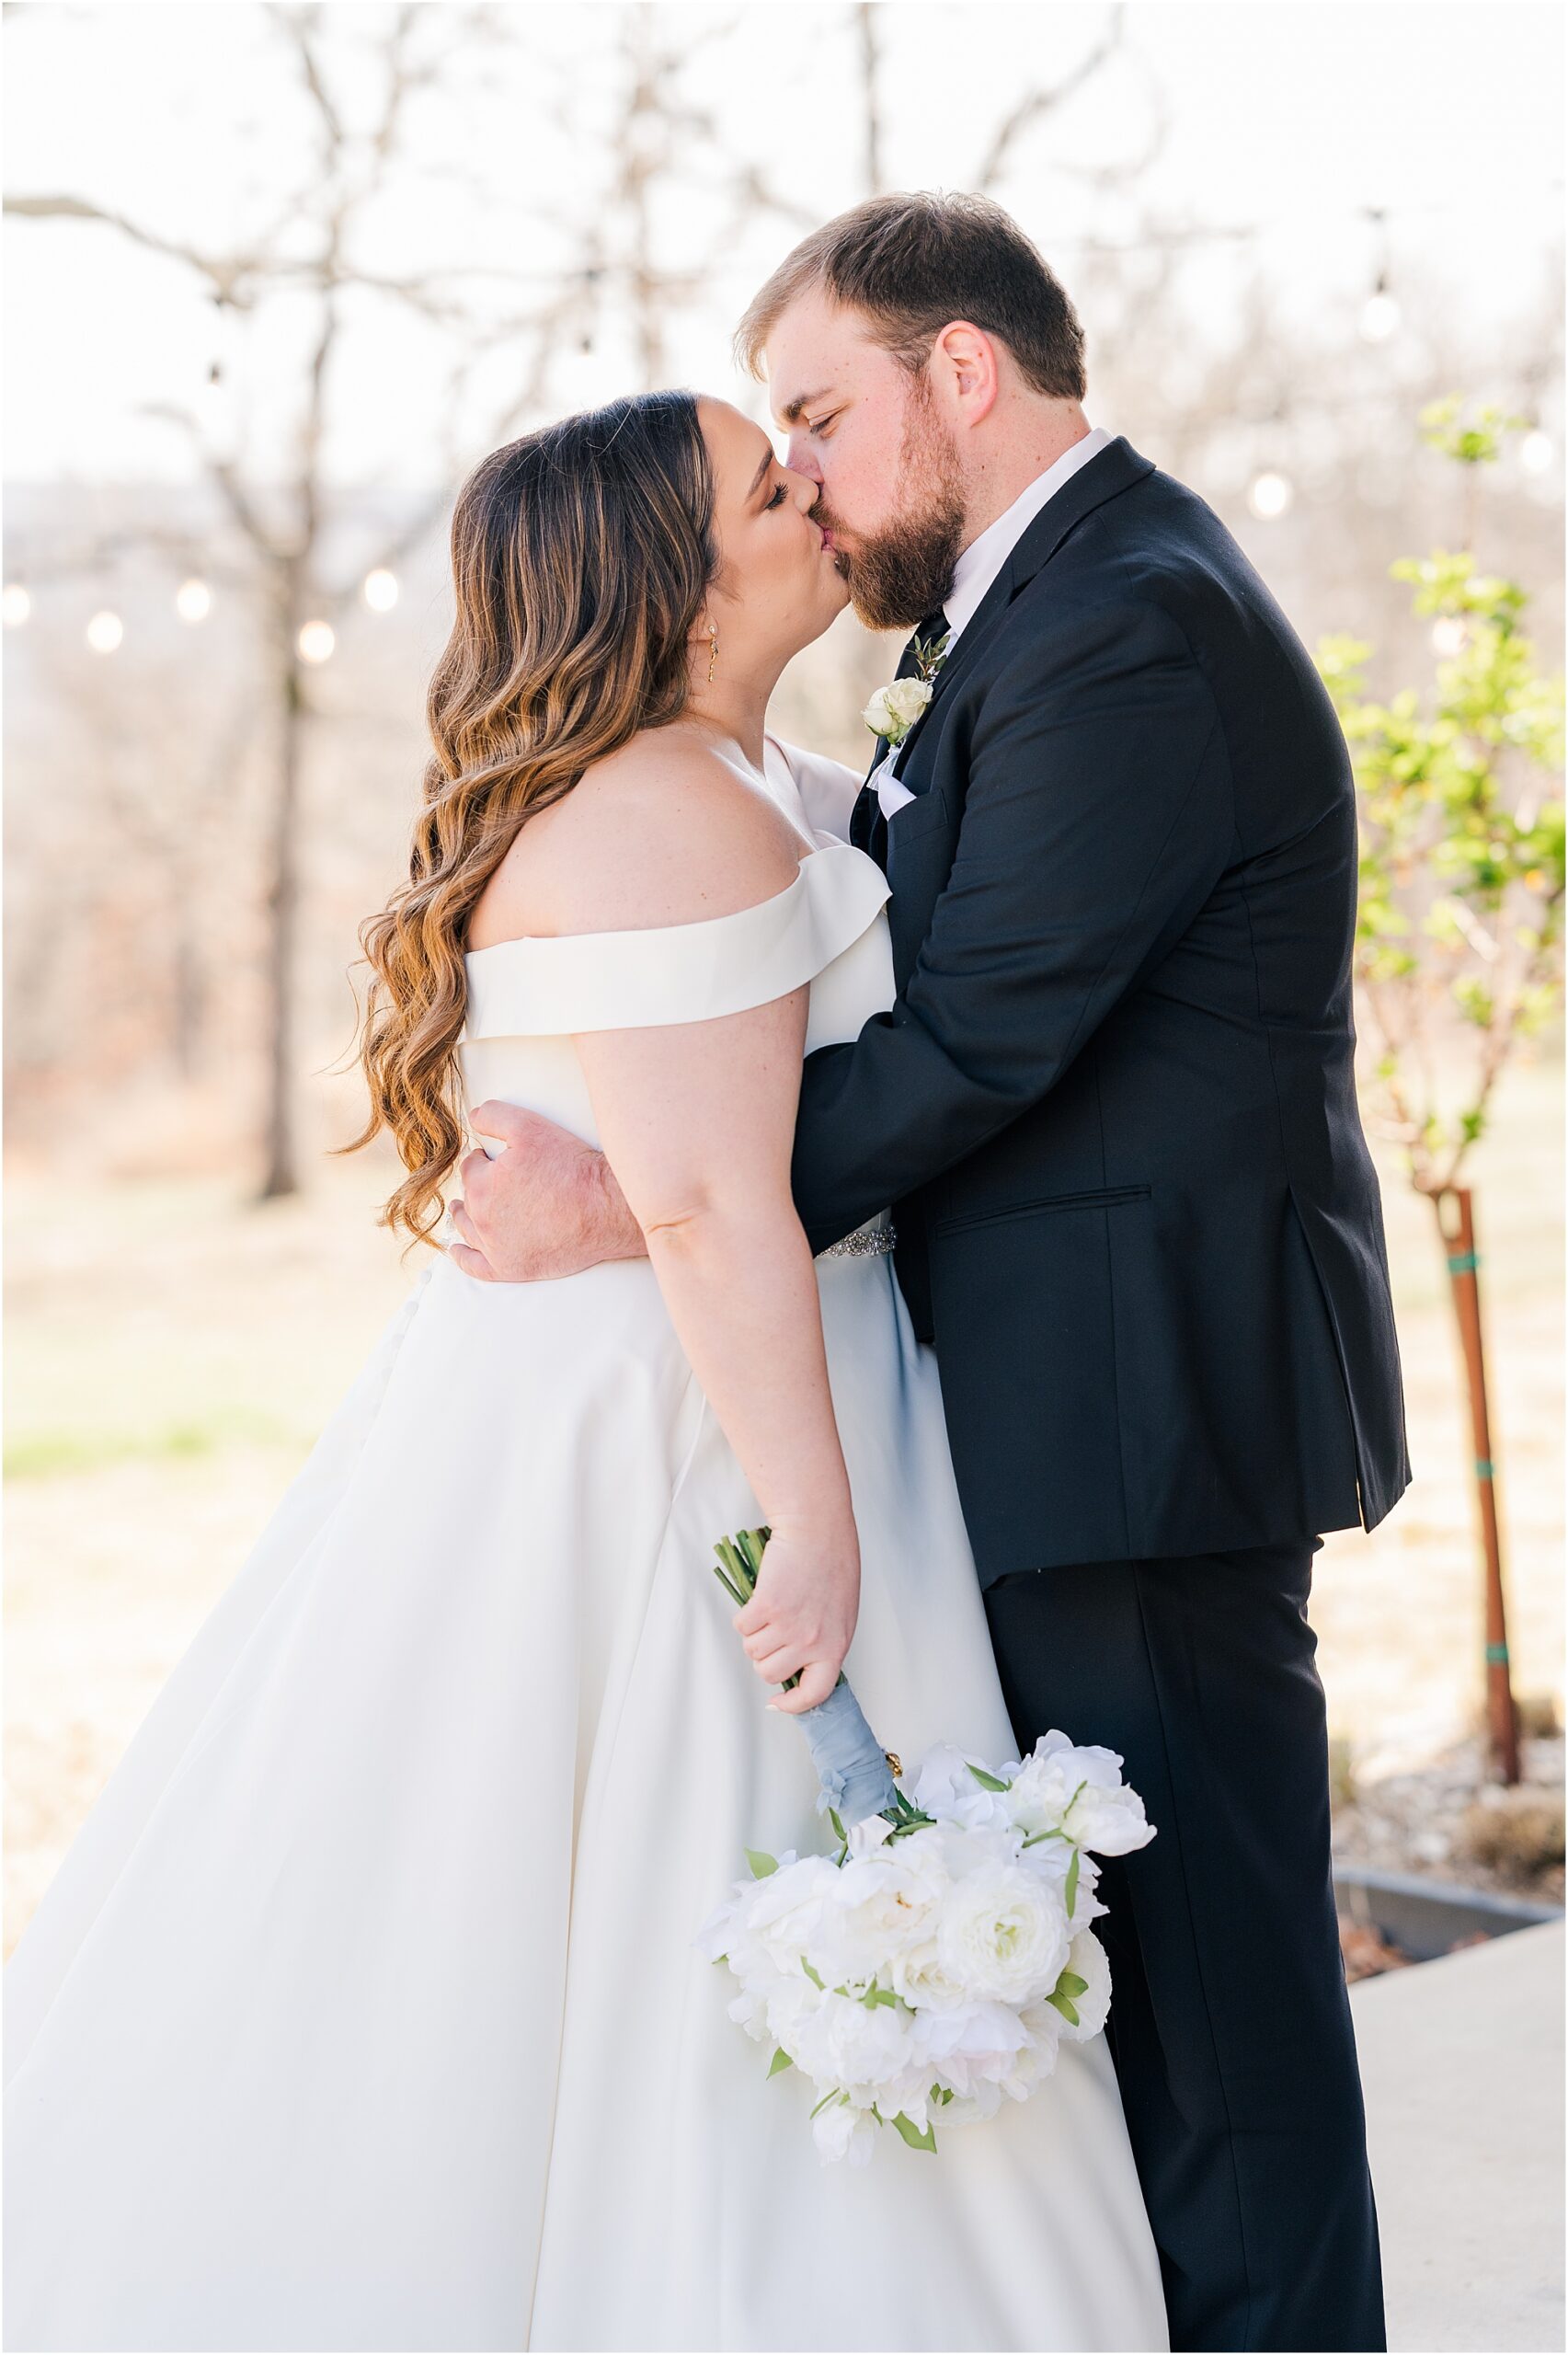 The bride and groom sharing a kiss before their ceremony at their Dream Point Ranch Wedding.